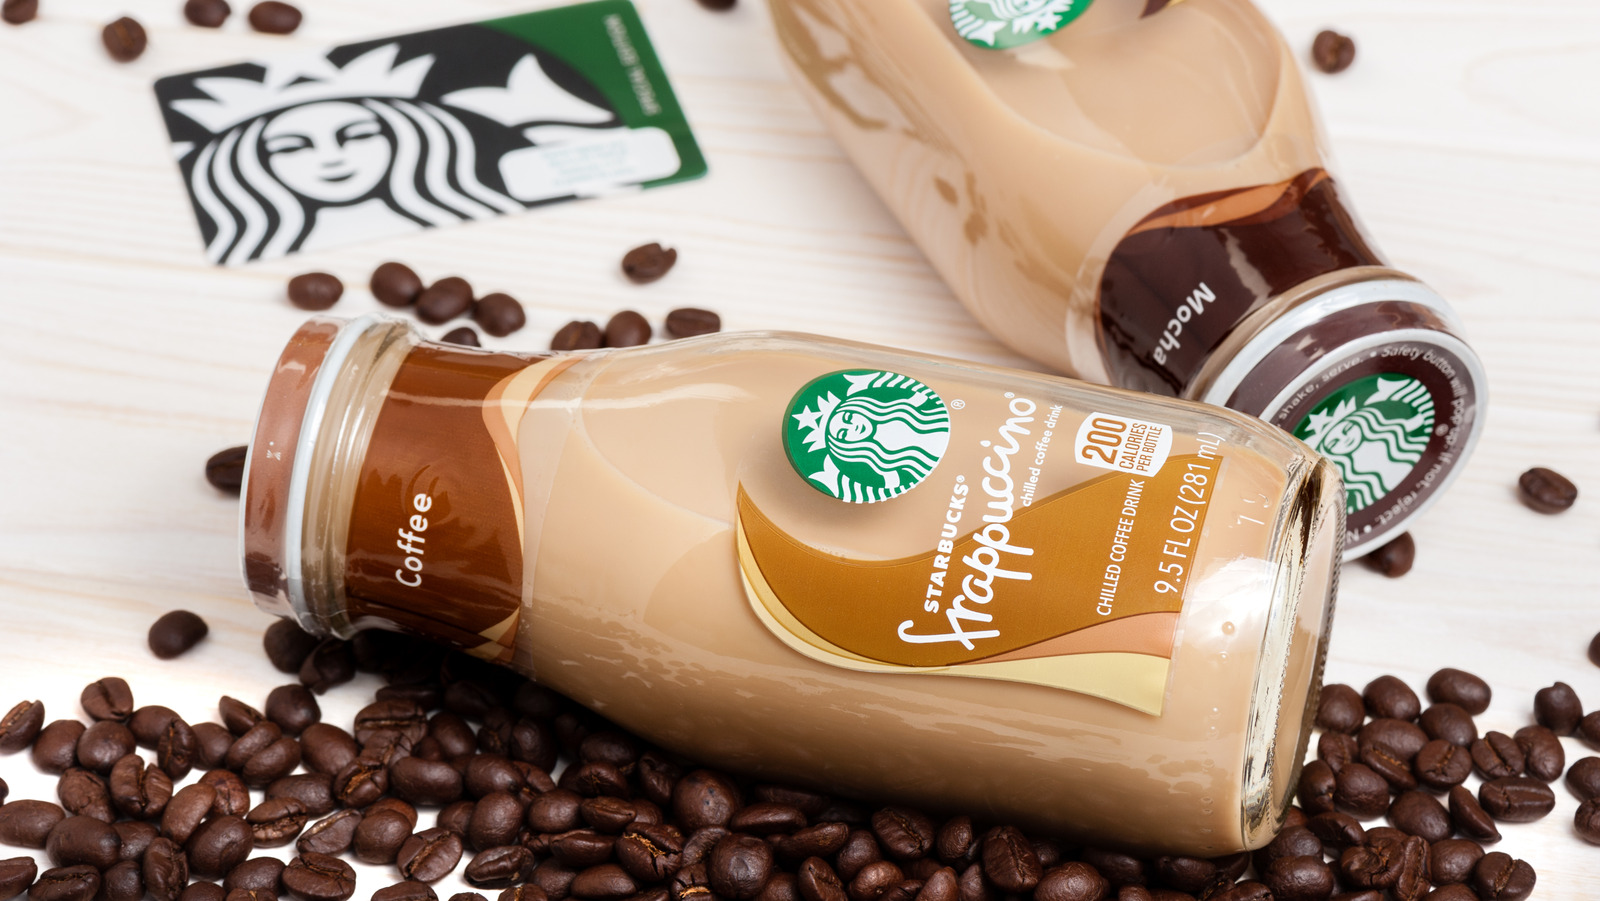 25 Years After The Bottled Frappuccino, Starbucks Rolls Out Cold & Crafted